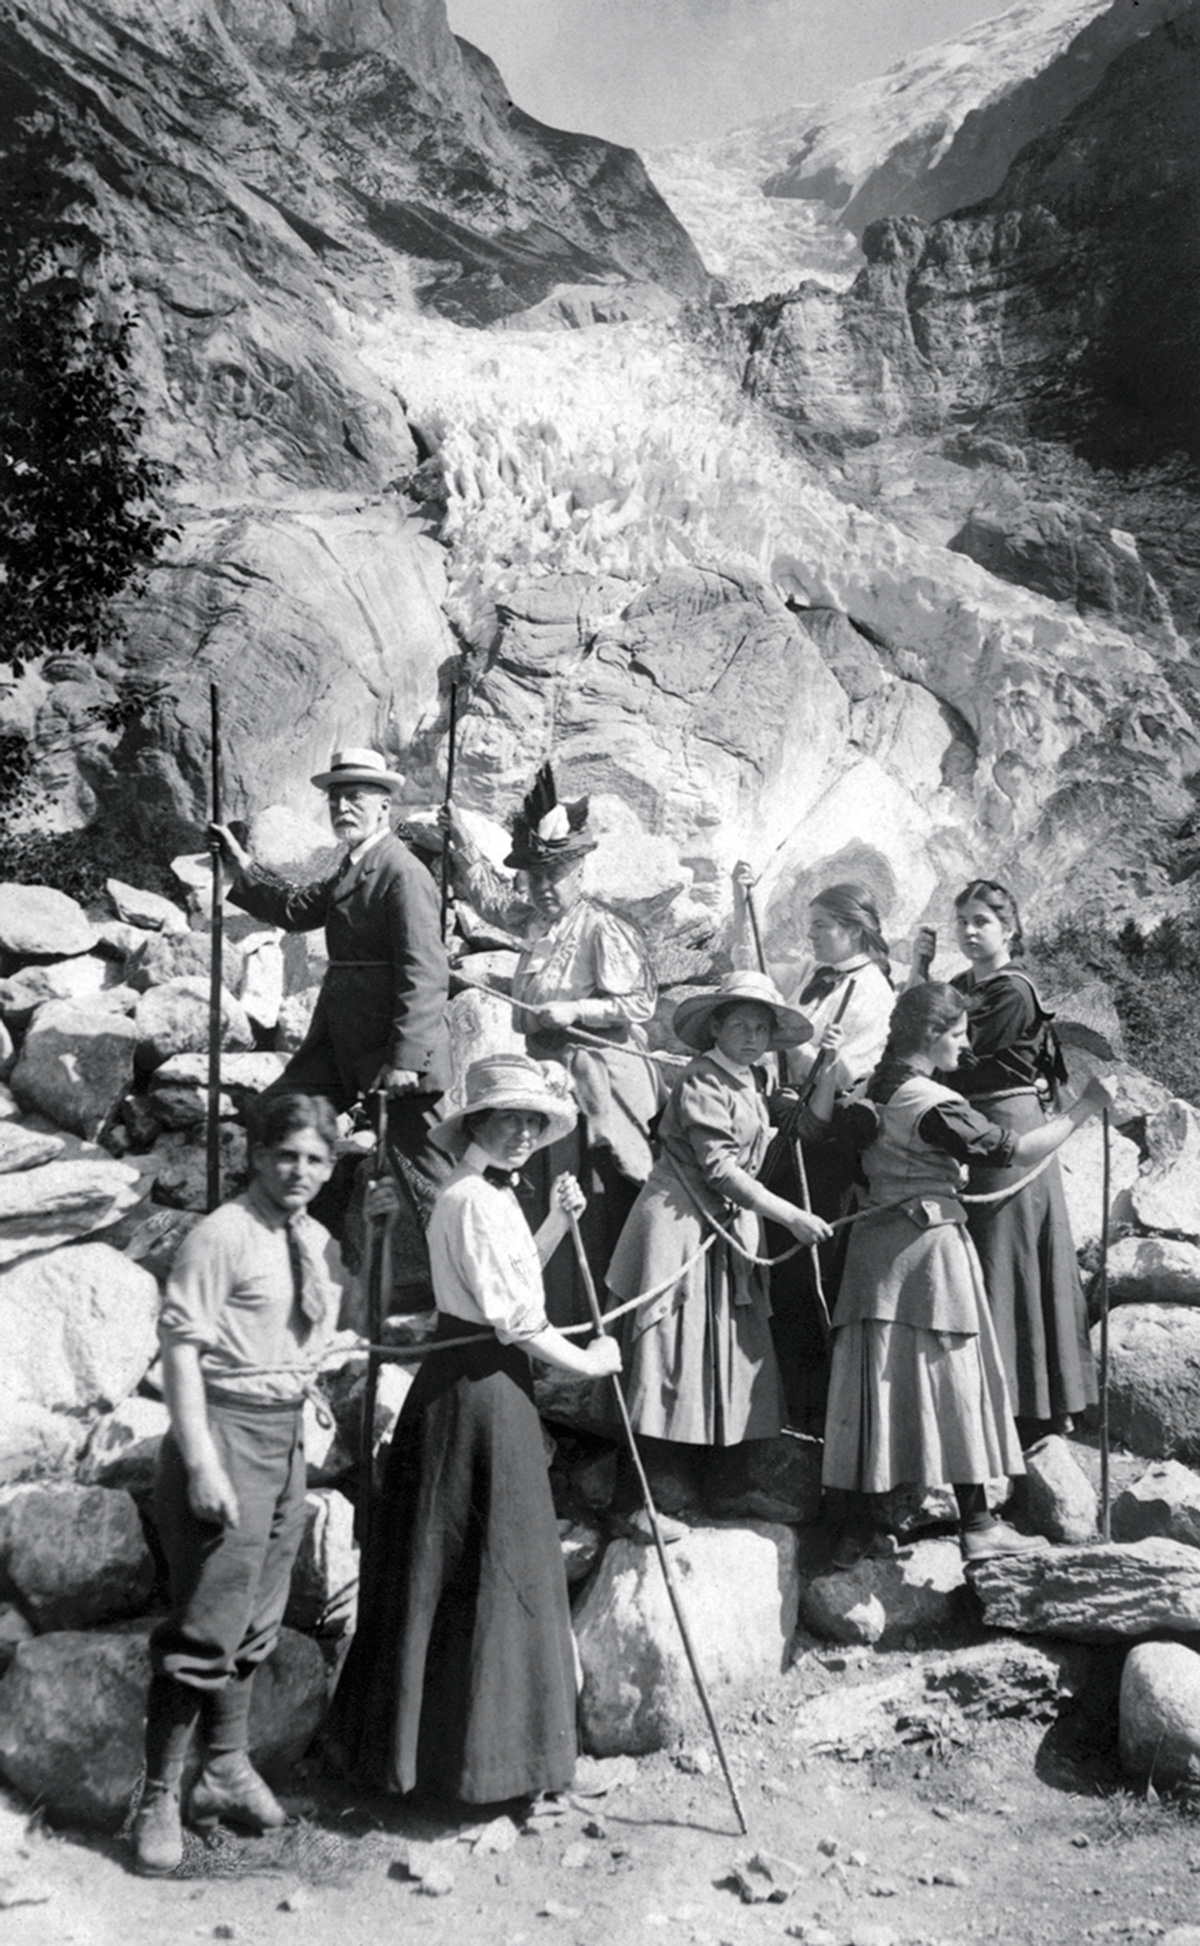 “A photograph of the Putnam family on a climbing expedition at Grindelwald before the nineteen eleven psychoanalytic congress at Weimar, where Putnam would deliver his American “plea” for a new, philosophically inclined approach to analysis. 
“